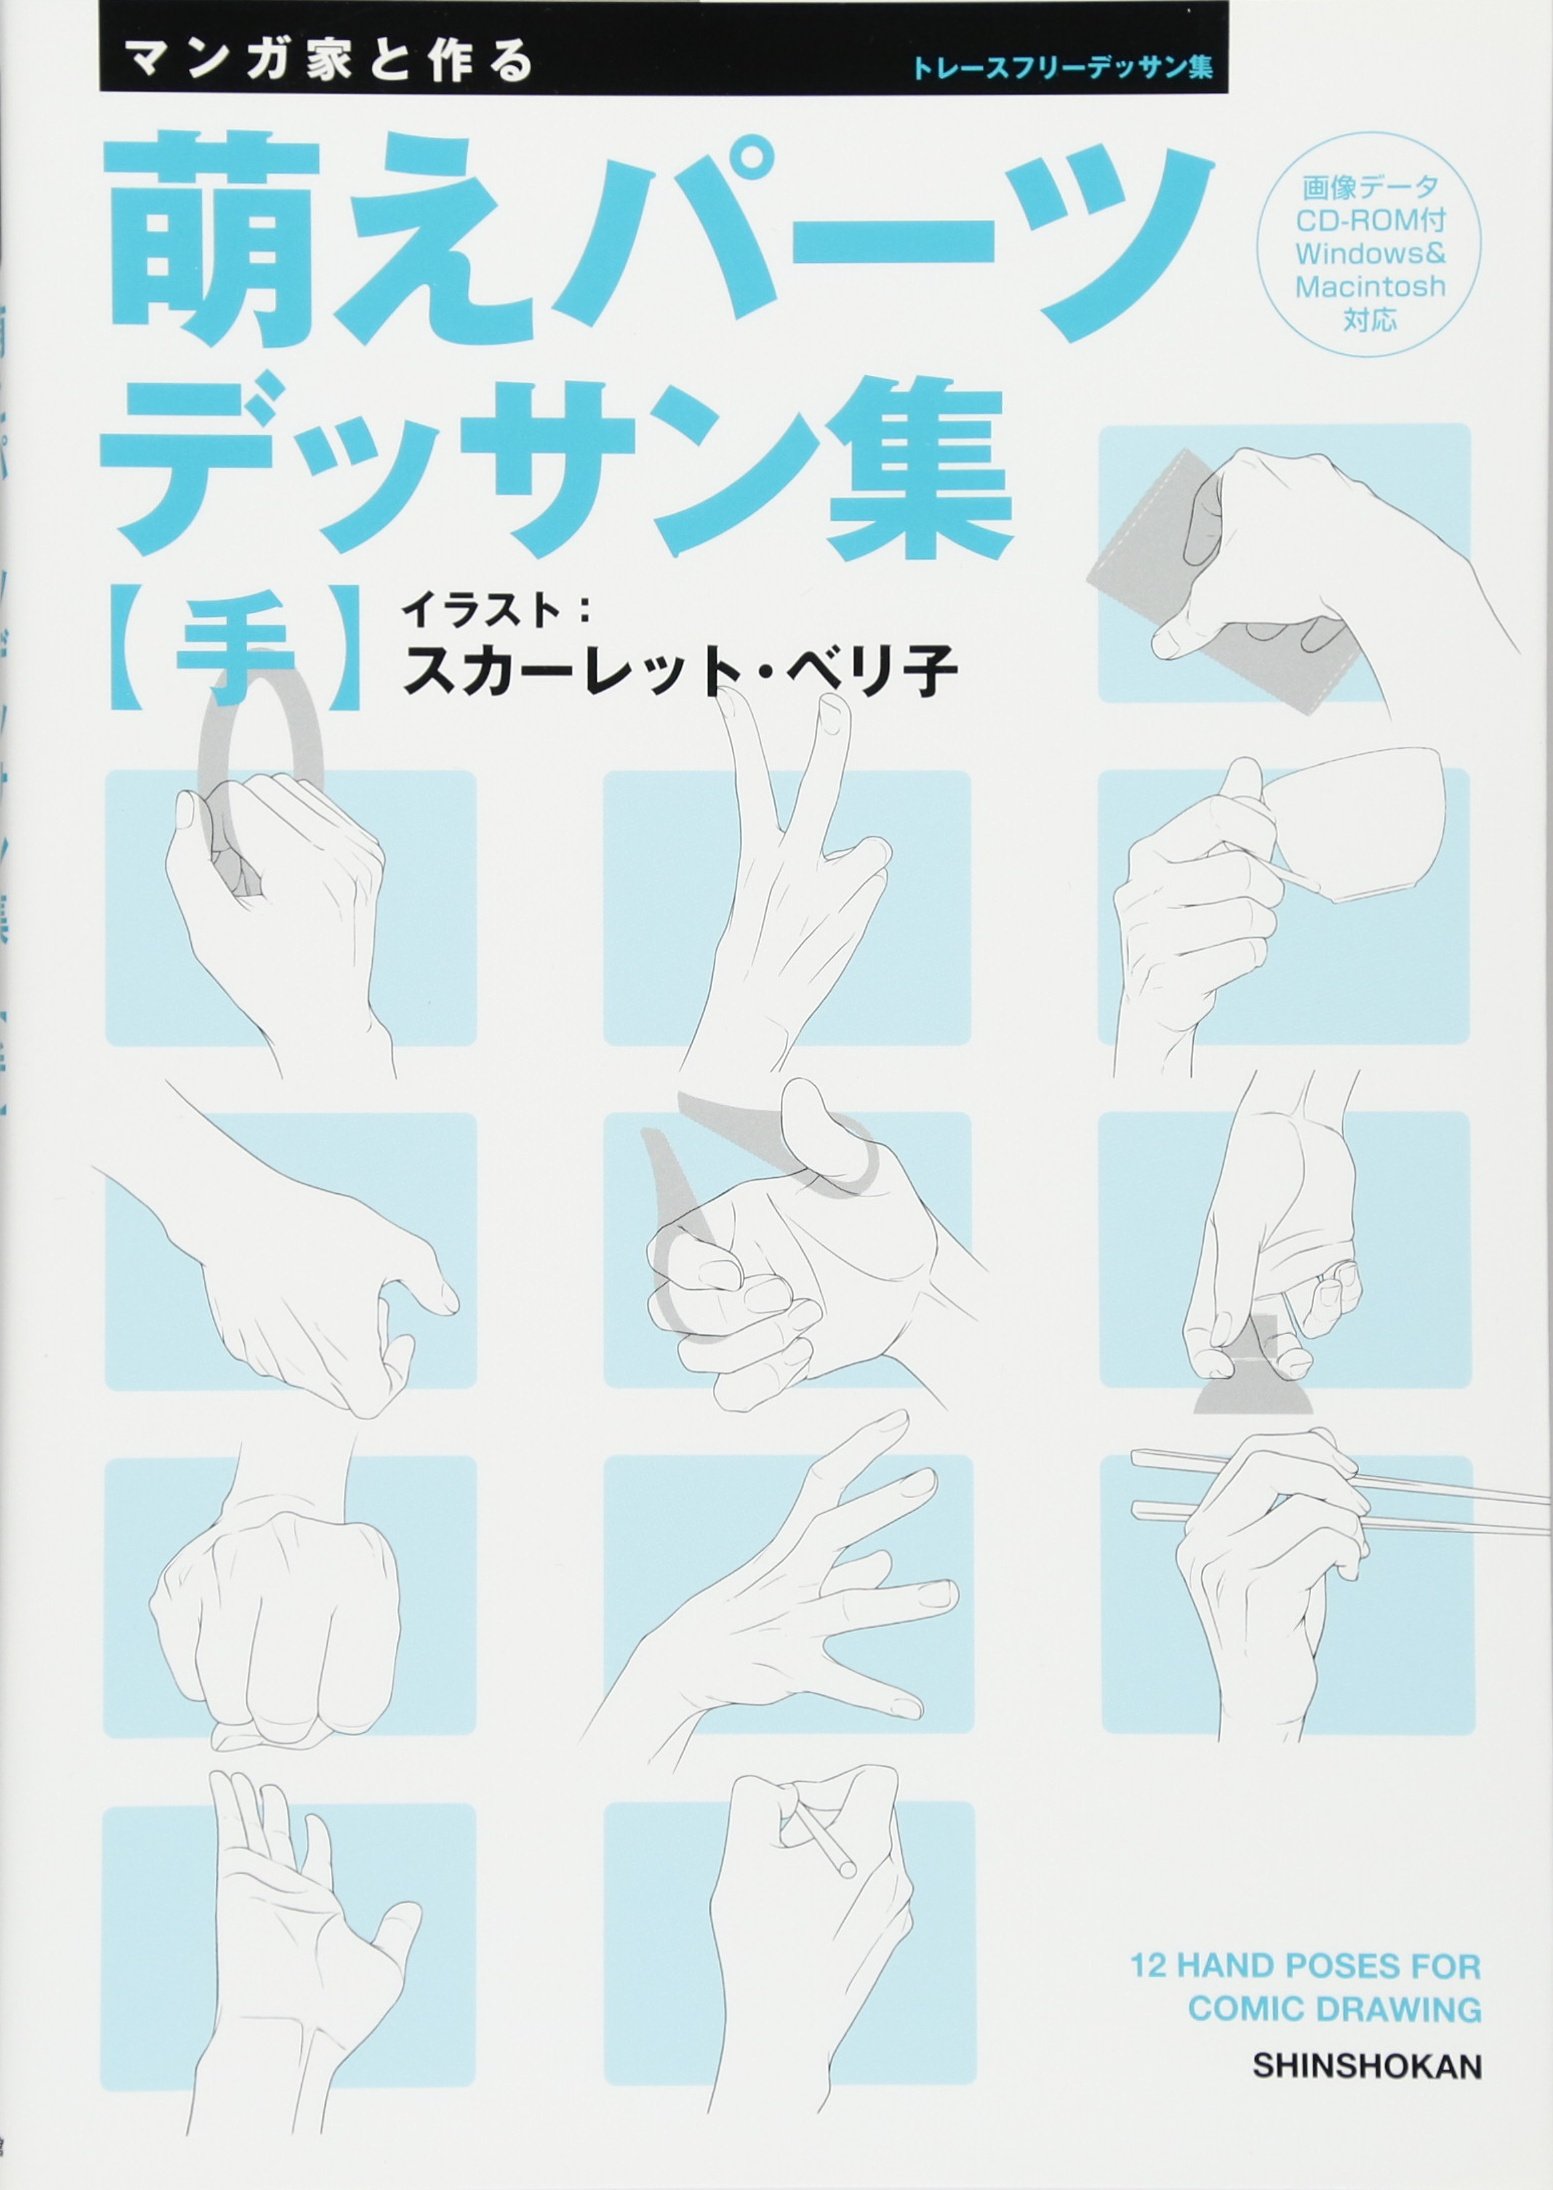 Made with the Manga Artist Drawings for Manga Hands by Scarlet Beriko